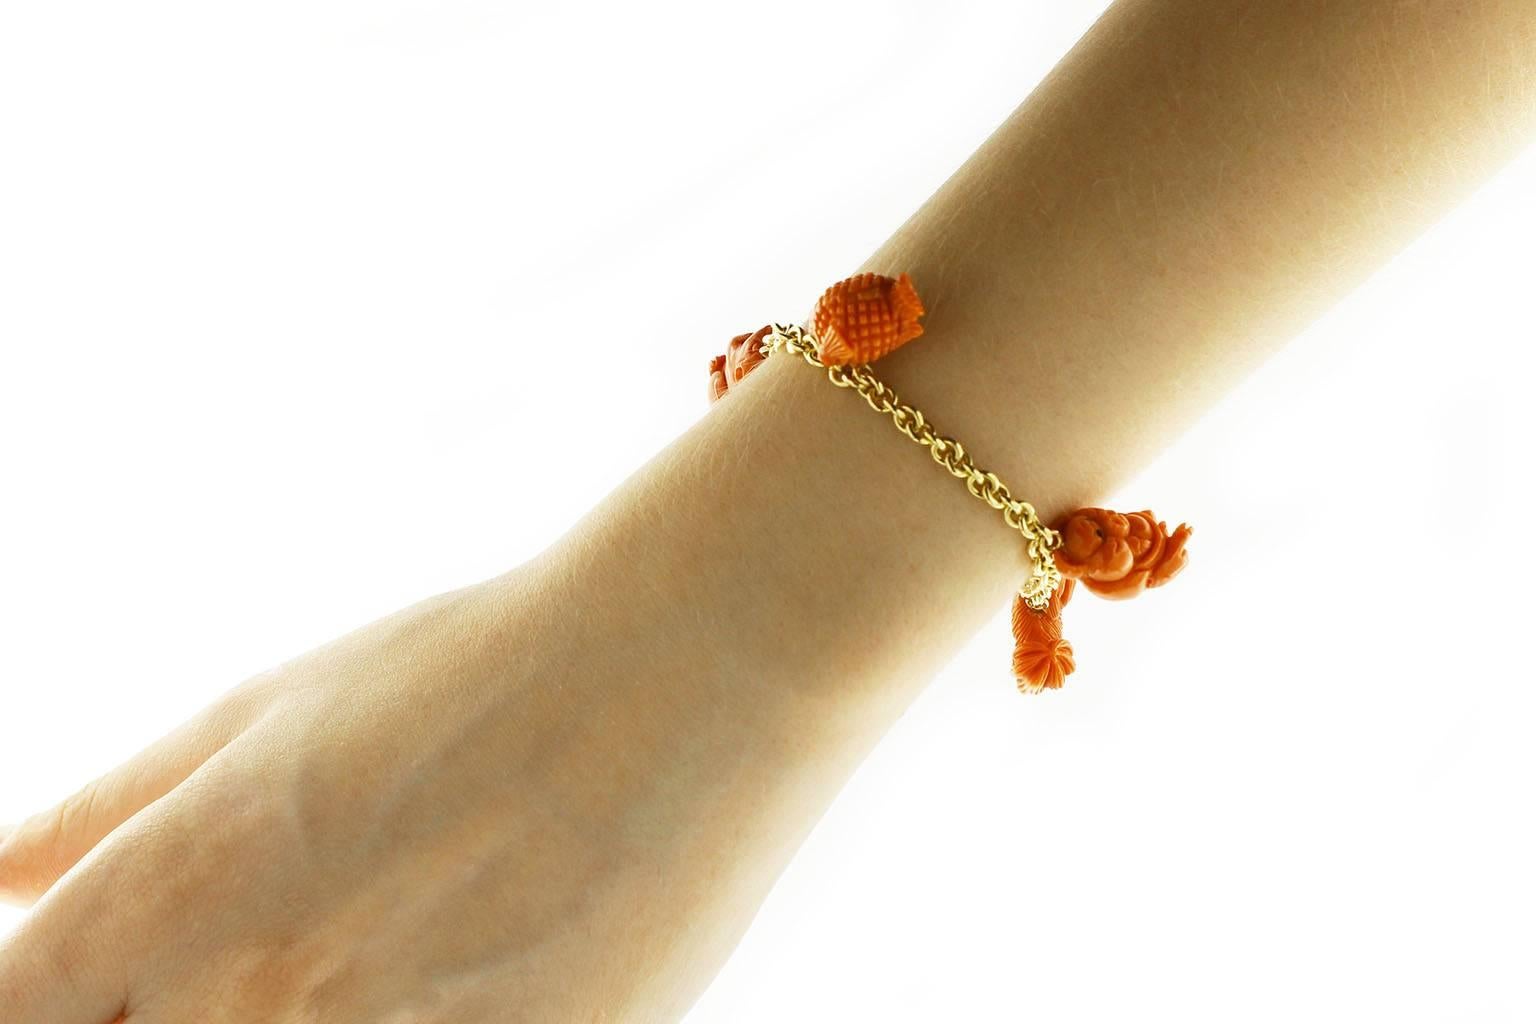 Jona design collection, hand crafted in Italy, 18 karat yellow gold chain bracelet with mediterranean coral charms.
All Jona jewelry is new and has never been previously owned or worn. Each item will arrive at your door beautifully gift wrapped in